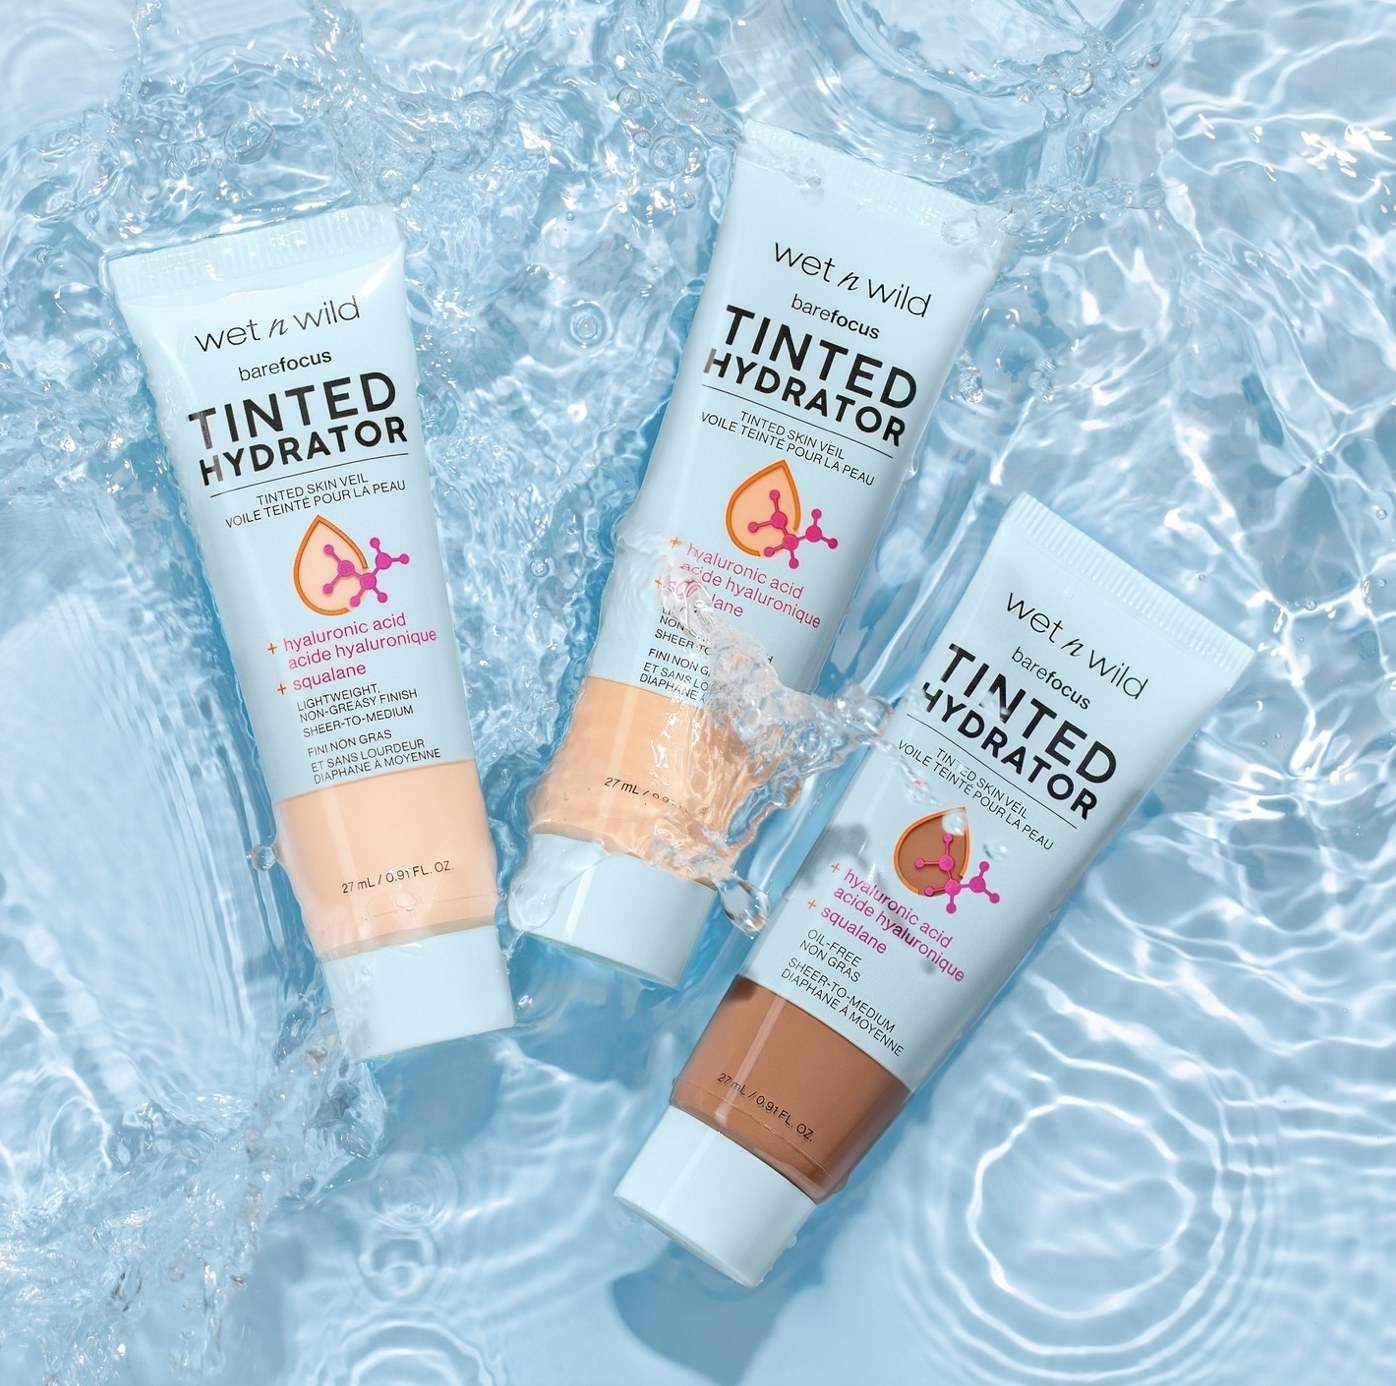 A set of tinted moisturizers